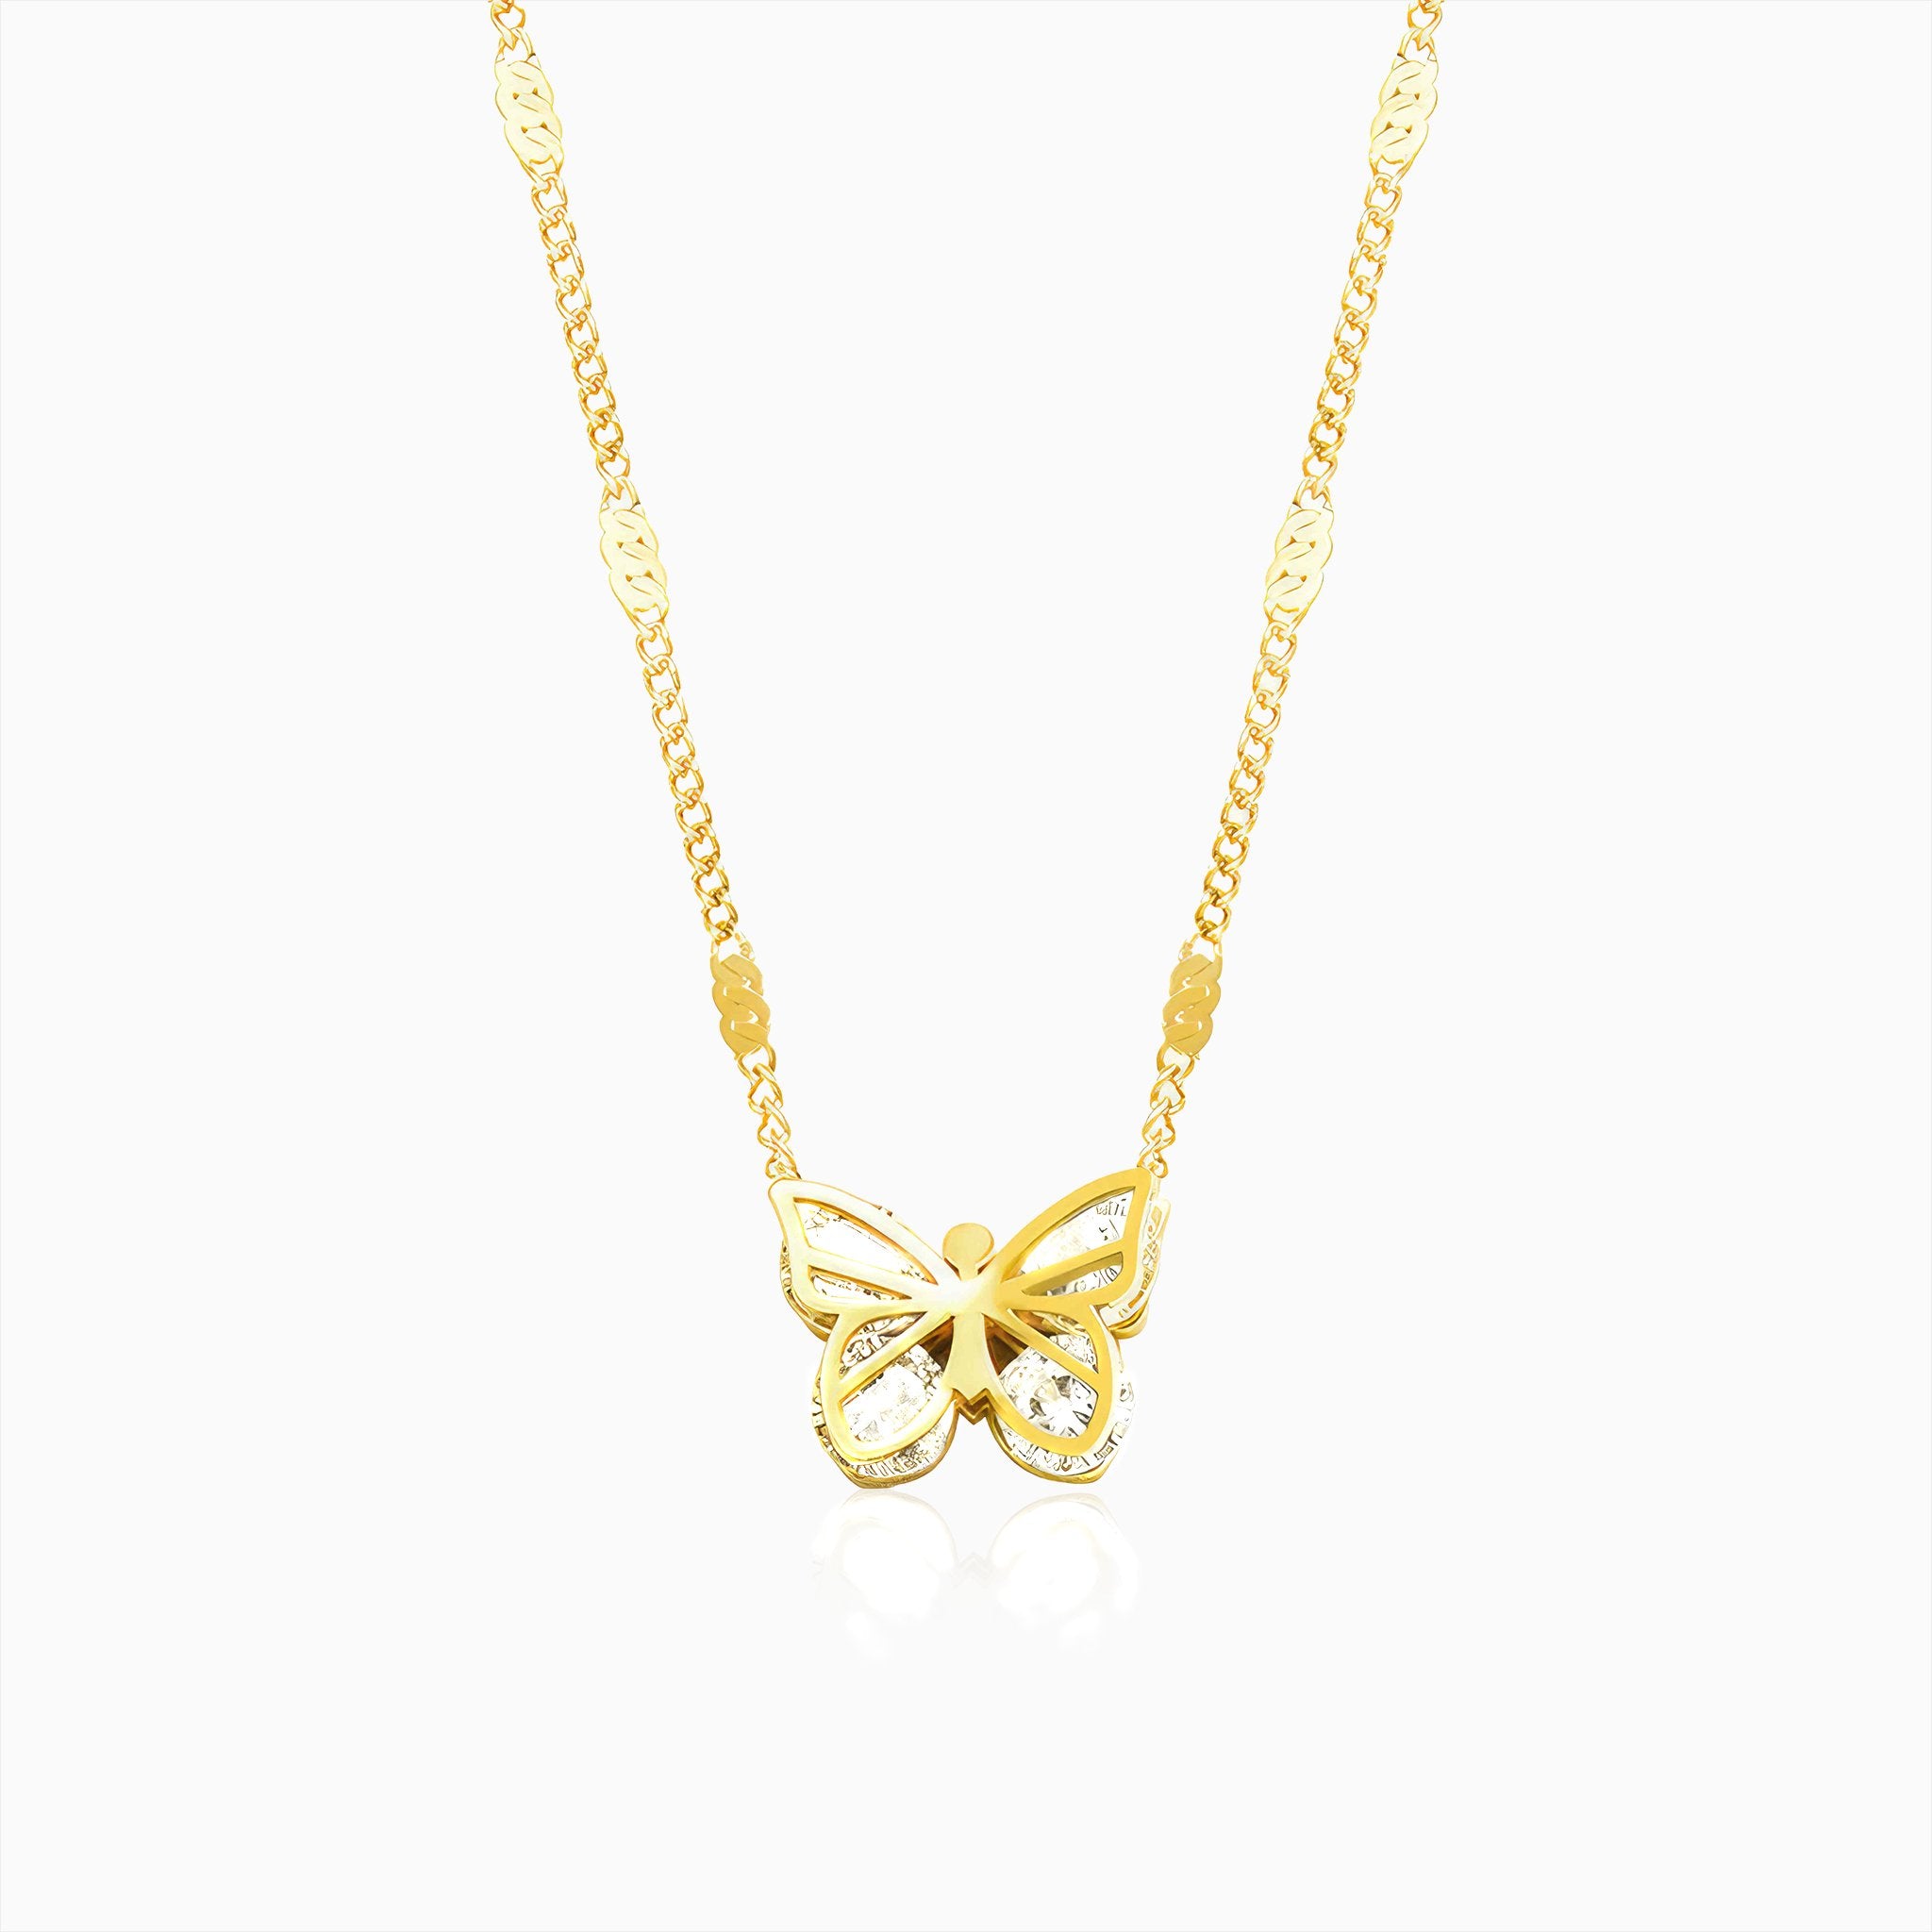 Hammer Design Butterfly Necklace - Nobbier - Necklace - 18K Gold And Titanium PVD Coated Jewelry